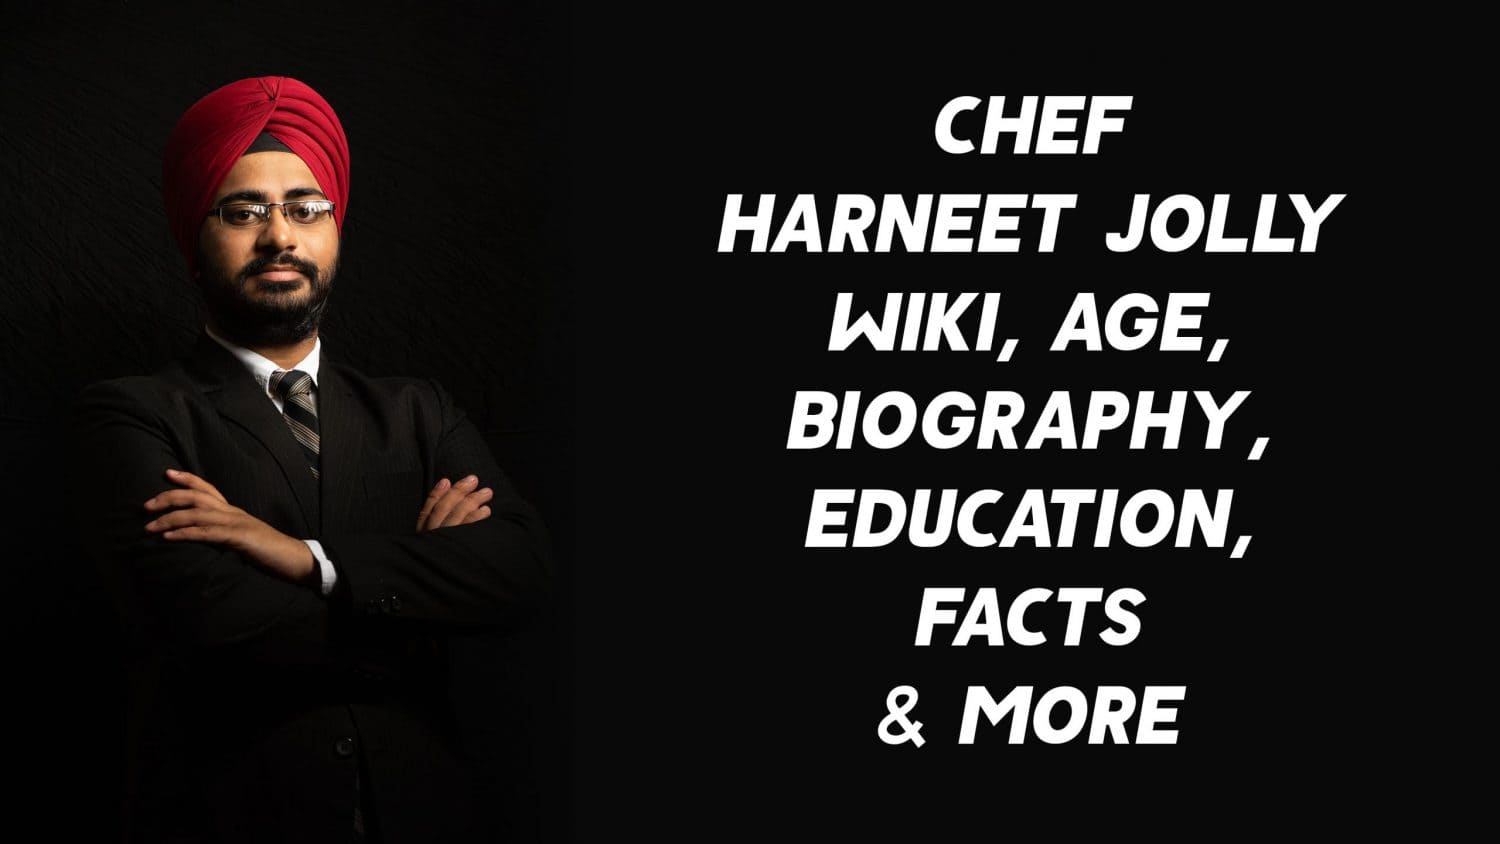 Chef Harneet Jolly Wiki, Age, Biography, Education, Facts & More 1